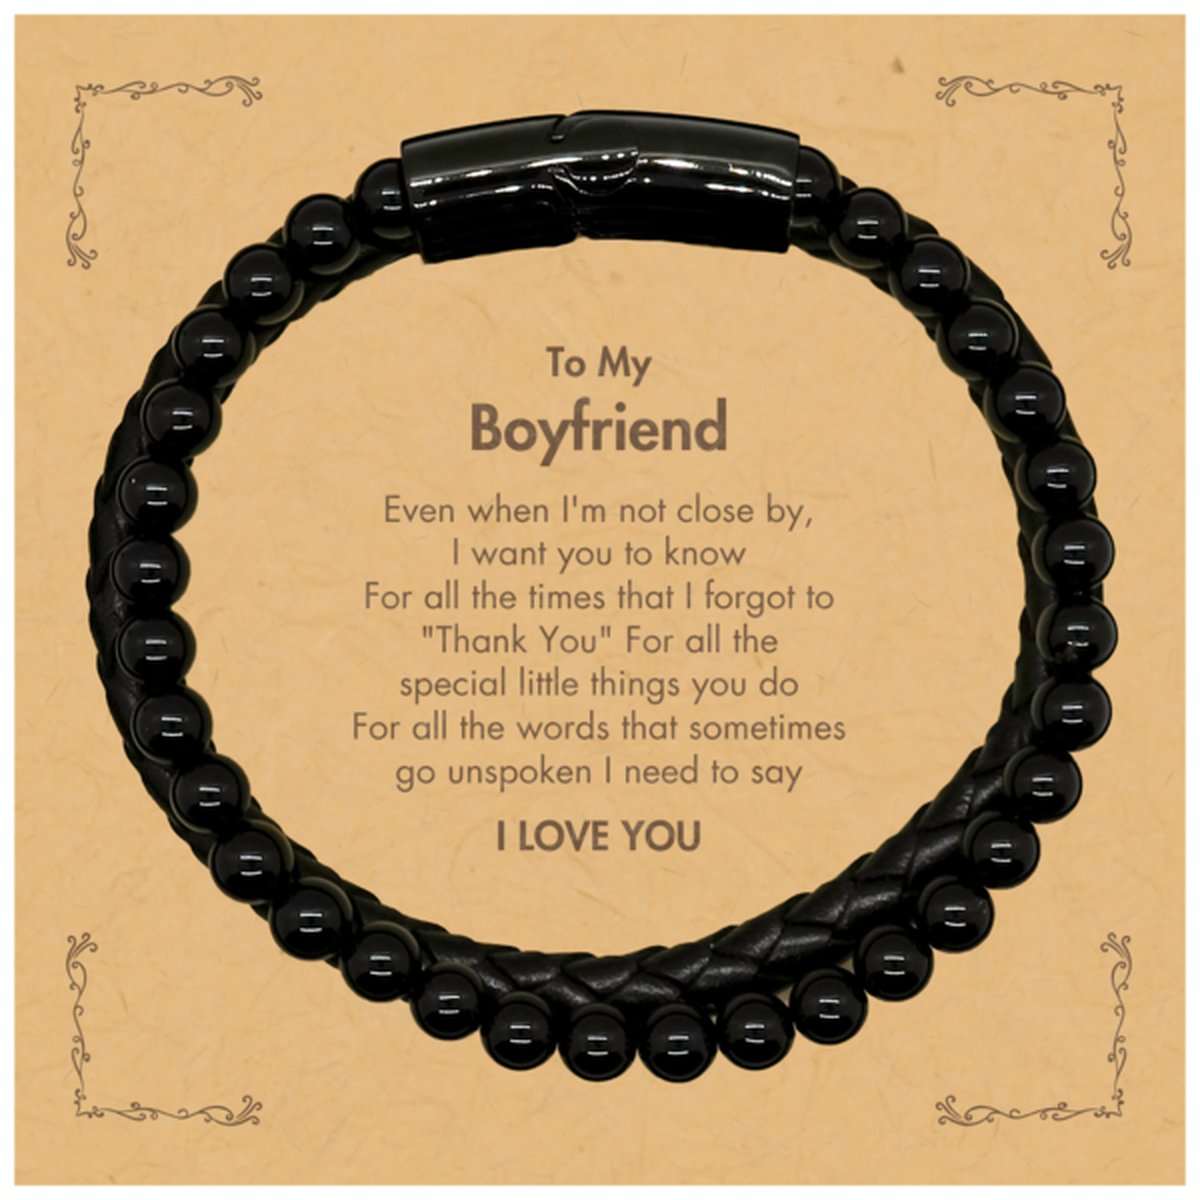 Thank You Gifts for Boyfriend, Keepsake Stone Leather Bracelets Gifts for Boyfriend Birthday Mother's day Father's Day Boyfriend For all the words That sometimes go unspoken I need to say I LOVE YOU